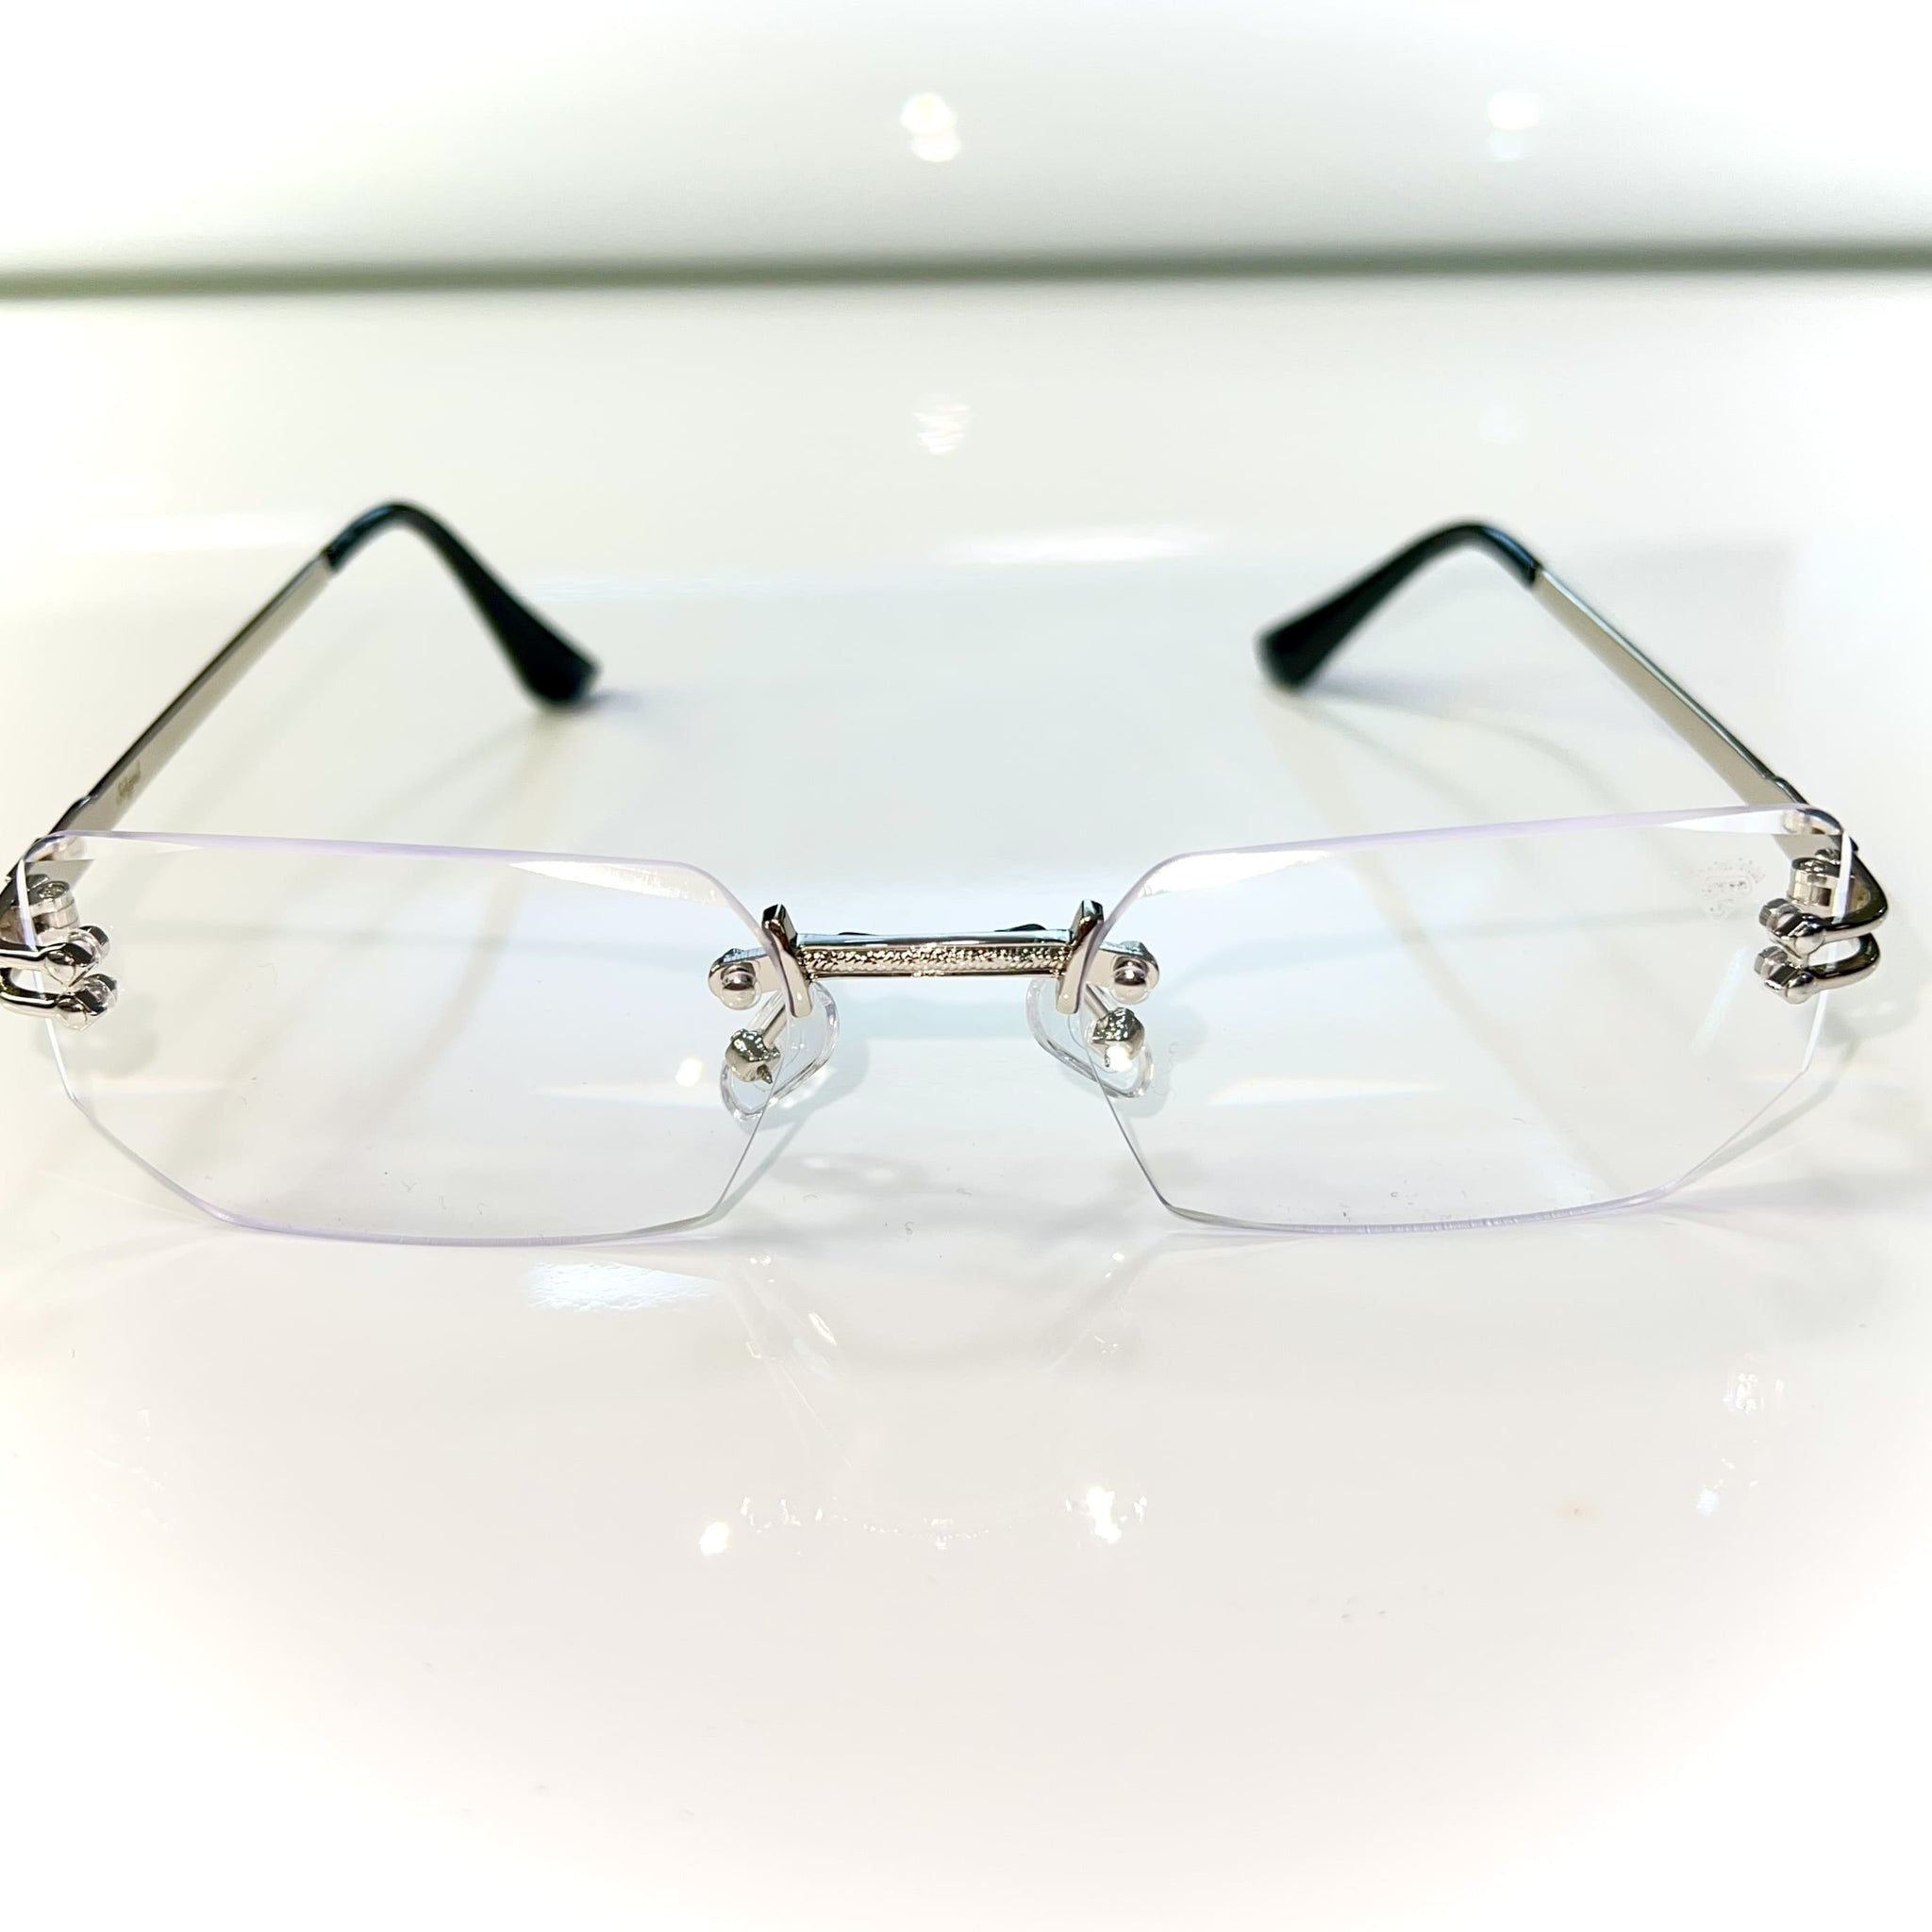 Rich Glasses - 14k gold plated - Sehgal Glasses - Transparent Shade / Silver Frame - Transparent Collection